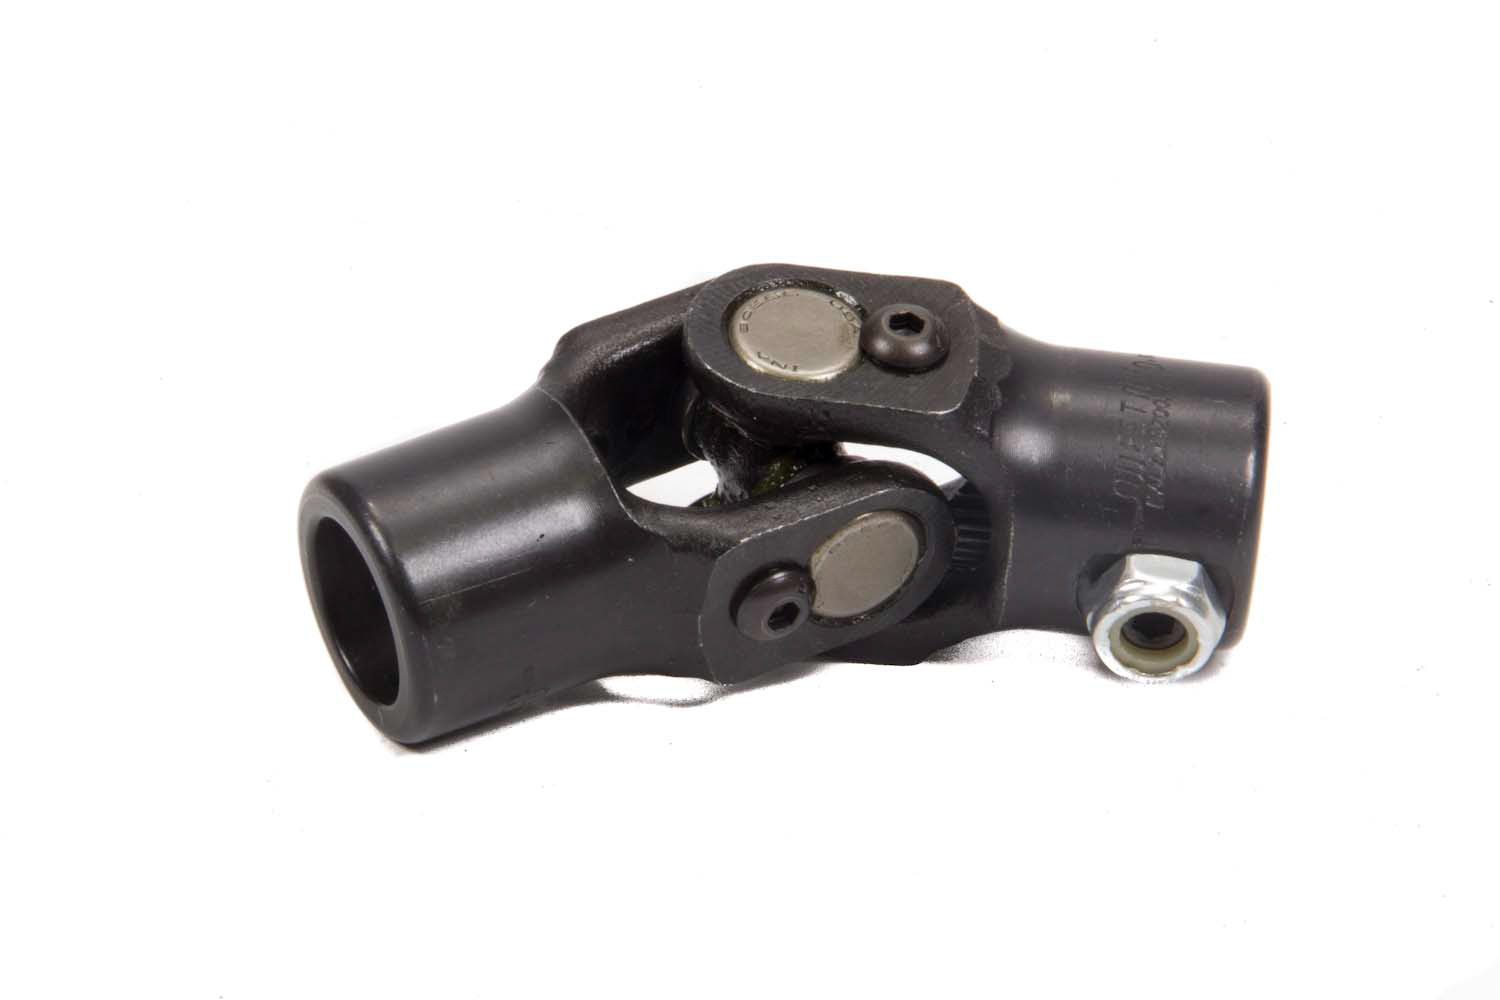 Steering Universal Joint - Single Joint - 3/4 in Smooth Bore to 13/16 in 36 Spline - Steel - Black Paint - Each